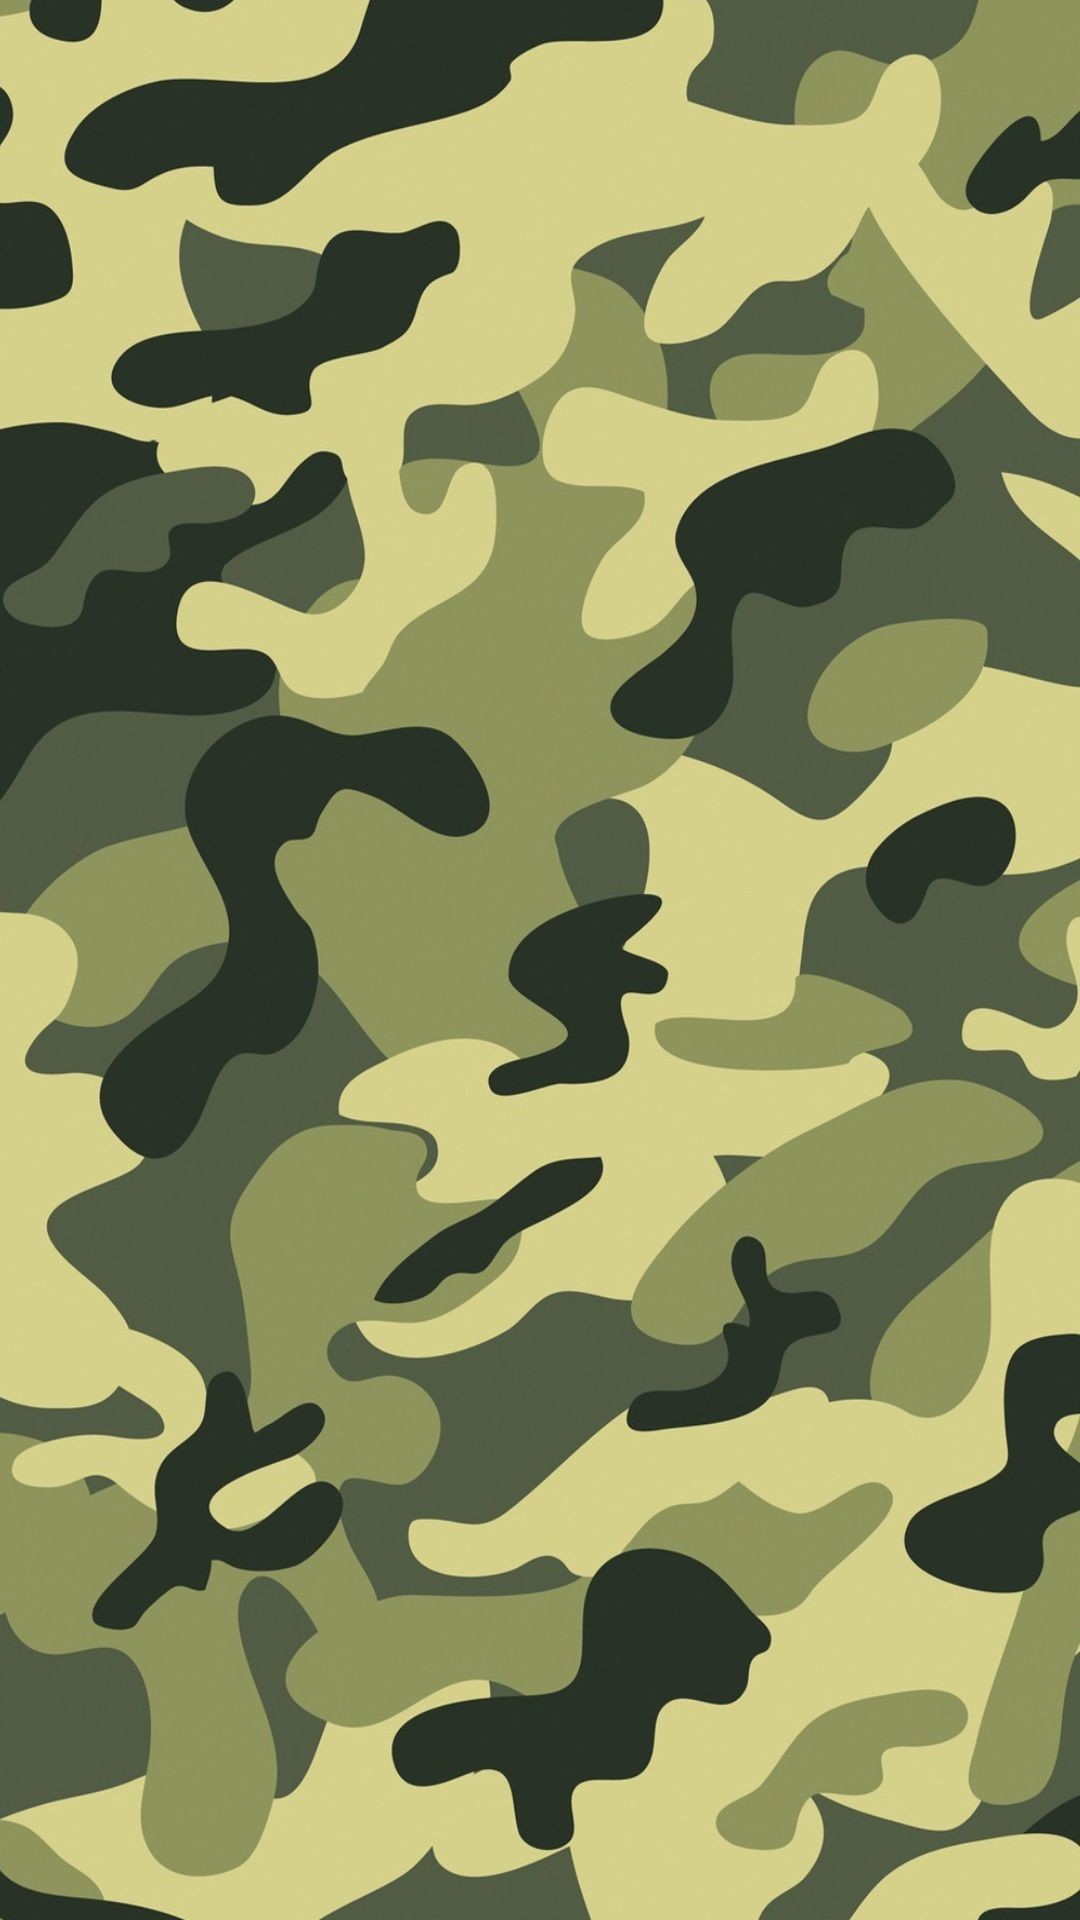 1080x1920 Camouflage wallpaper for iPhone or Android. Tags: camo, hunting, army,  backgrounds, mobile. #camouflage #camo #wallpaper